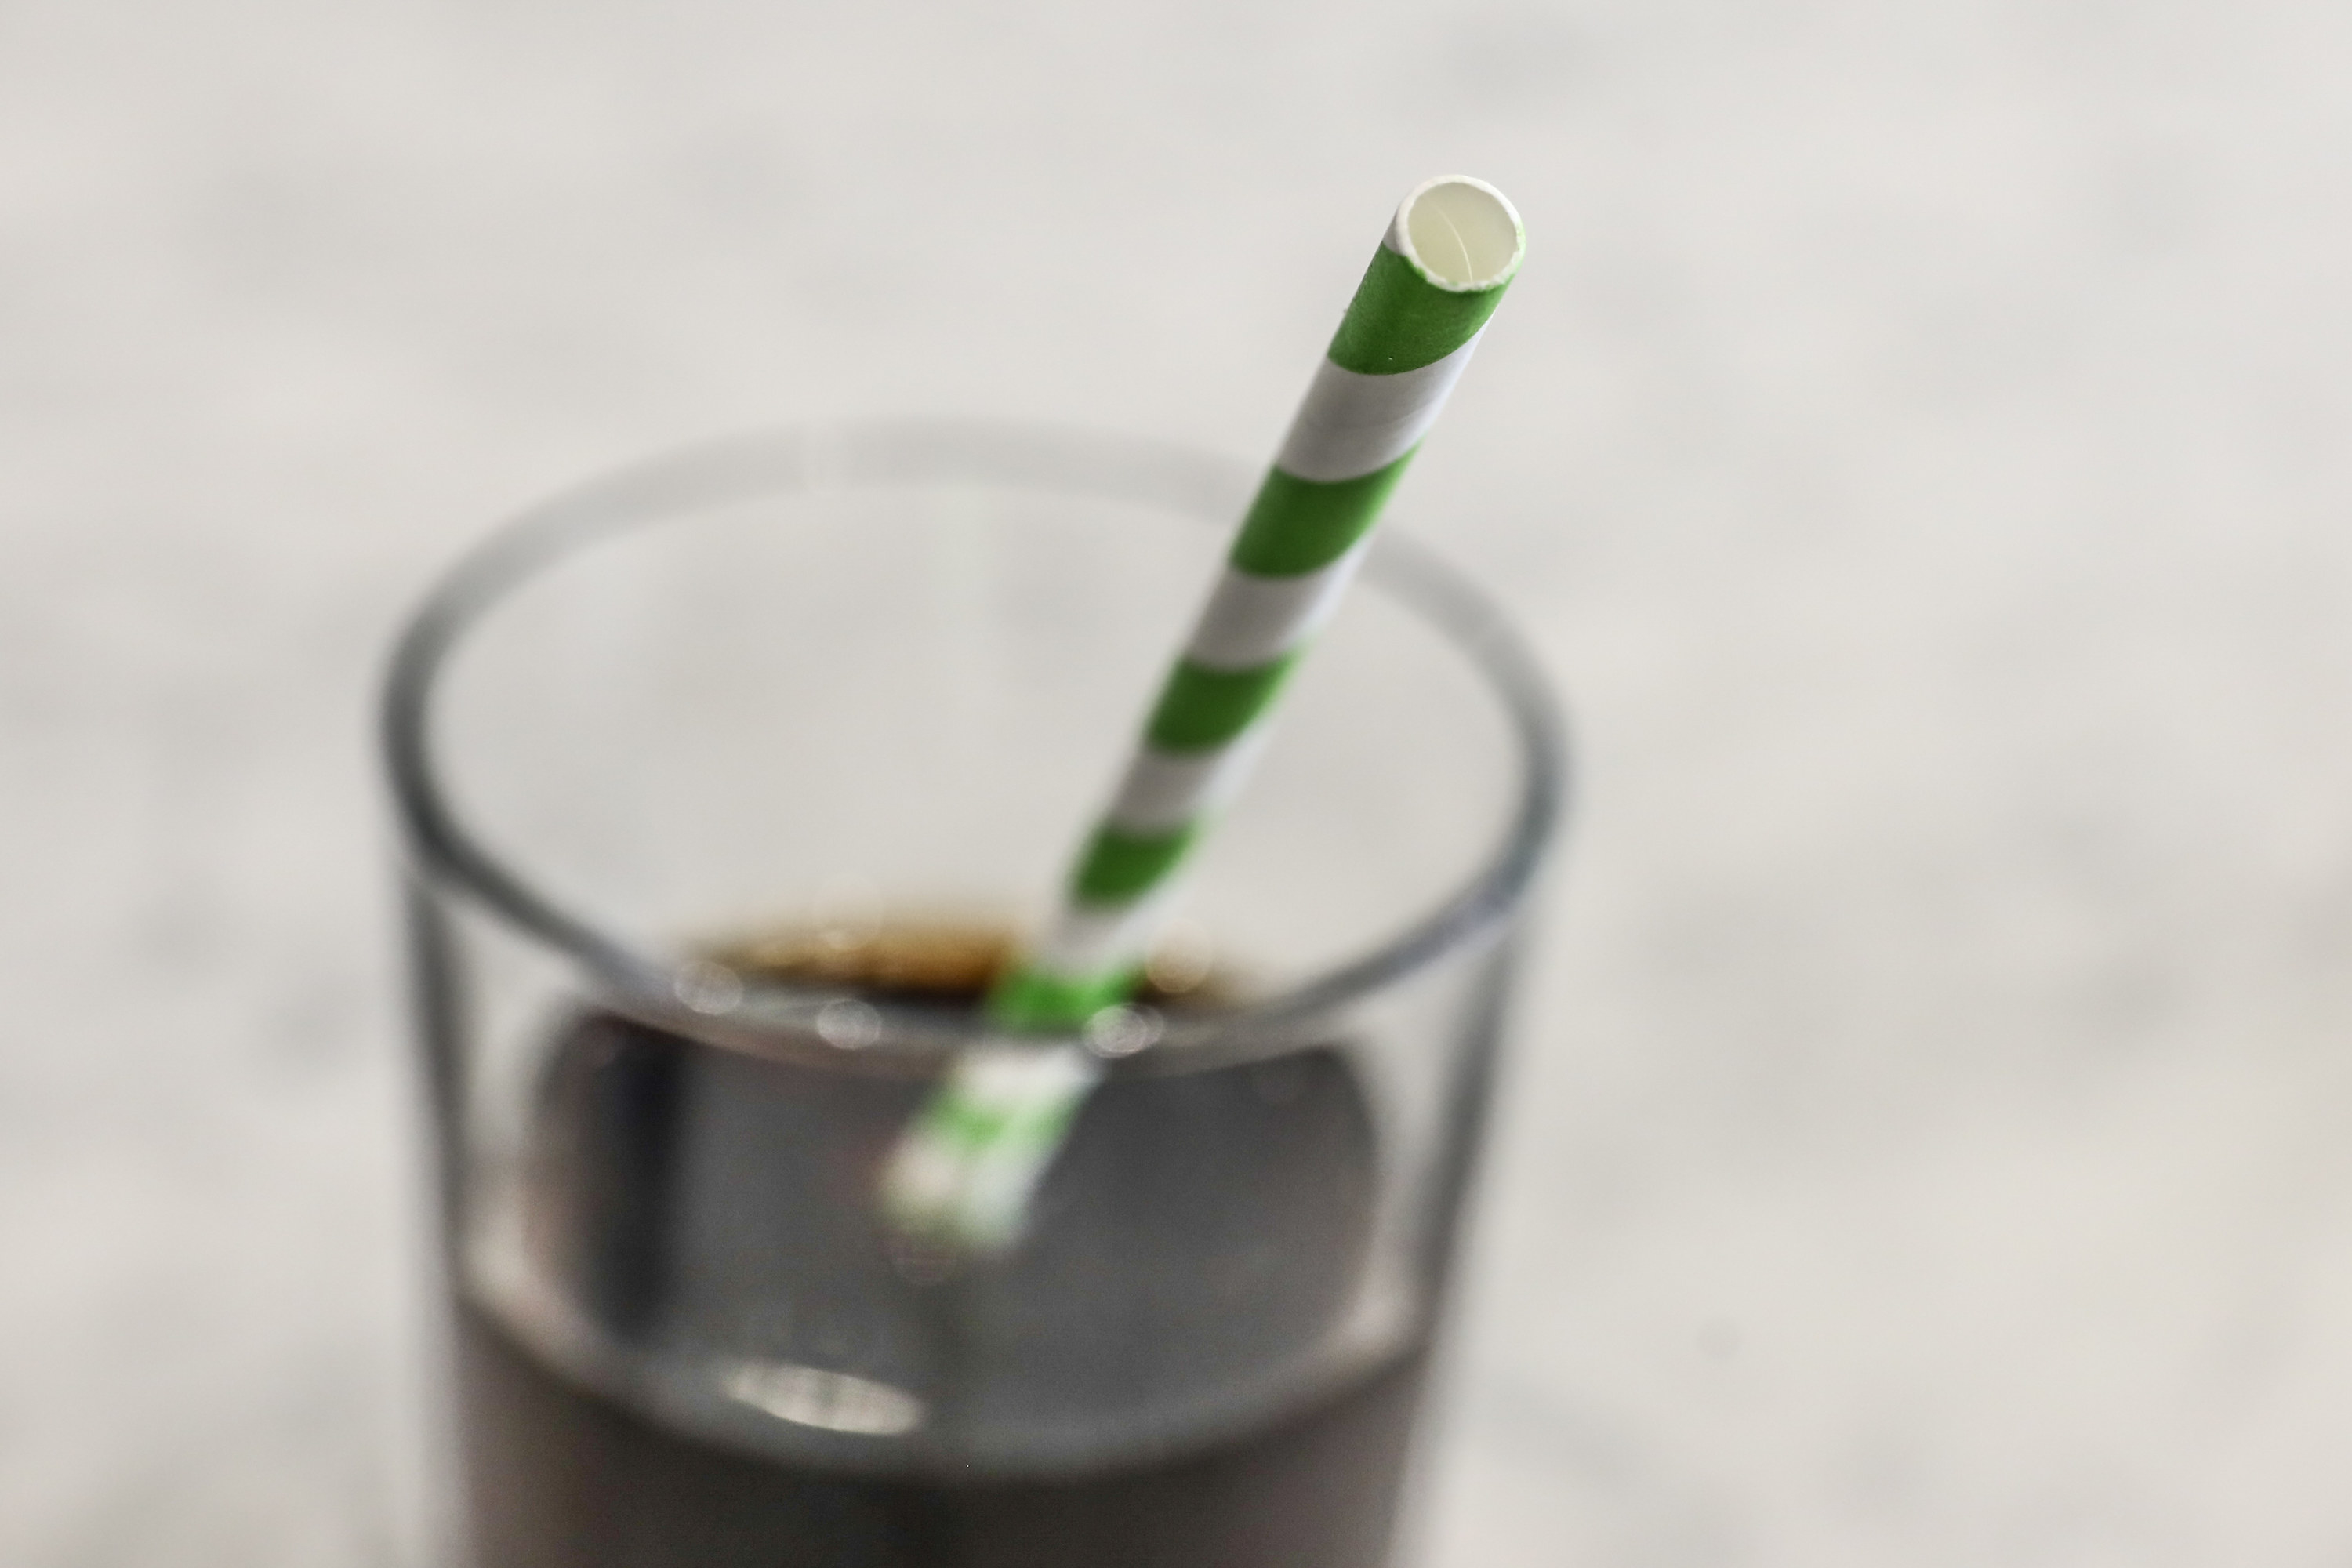 Glass with a green-and-white striped straw